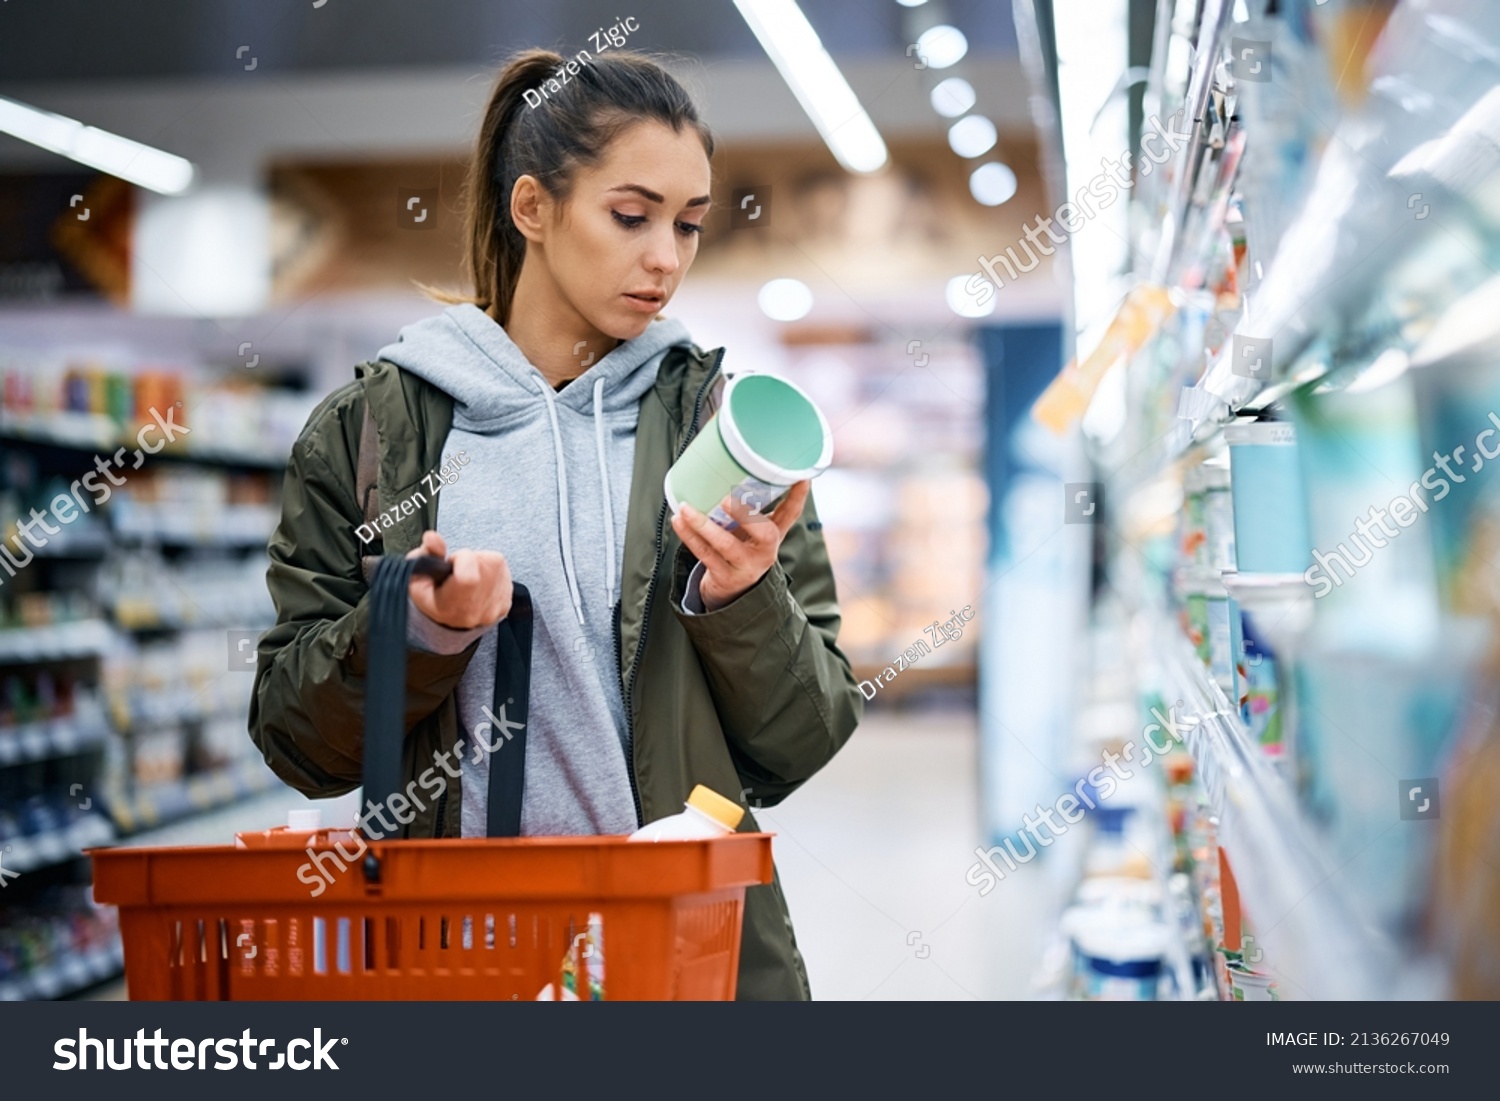 Young woman buying diary product and reading food label in grocery store. #2136267049